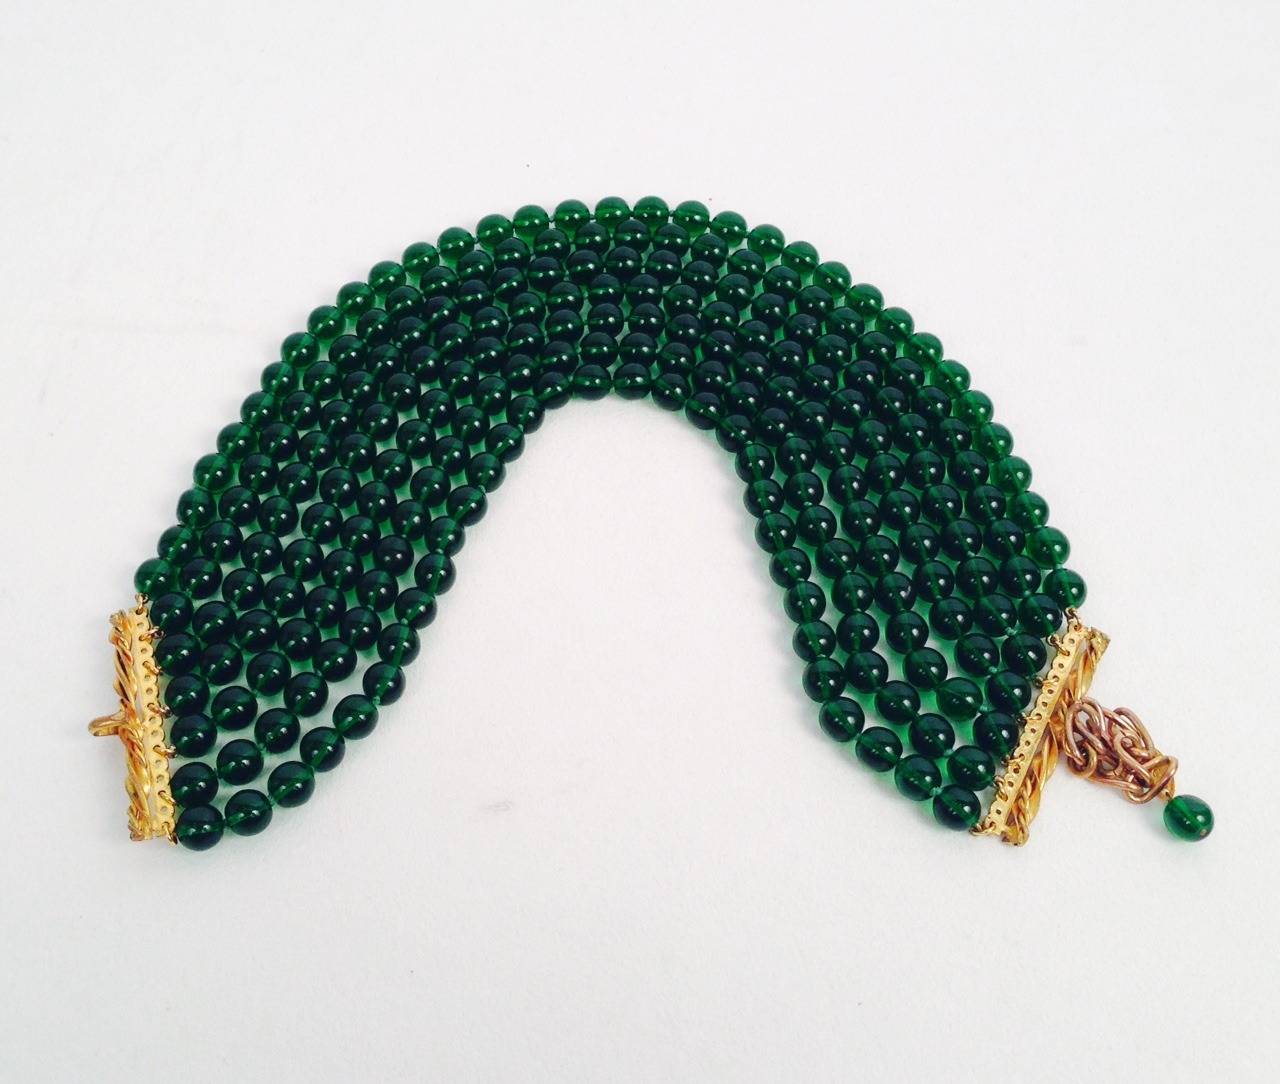 Vintage Chanel Gripoix Green Glass Bead 7 Strand Torsade is unique!  Rare necklace pays homage to Chanel's love of versatility.  Perfect for day or night, emerald green beads may be worn as a torsade or untwisted.  Either way, necklace is